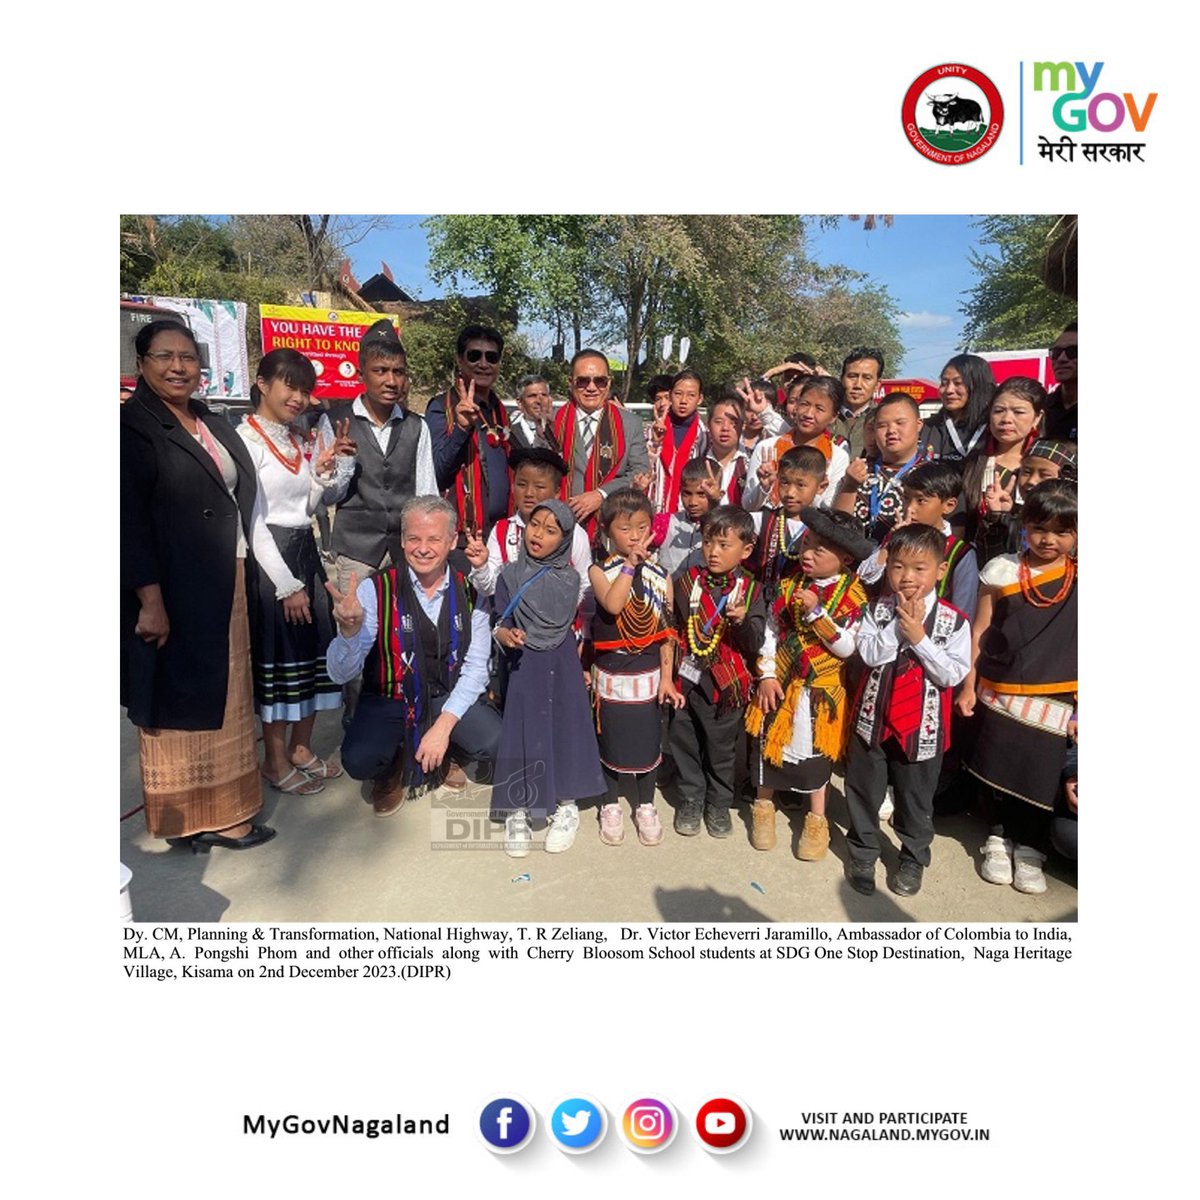 Dy Chief Minister, Planning & Transformation, National Highway,@TRZeliang, H.E. Dr. Victor Echeverri Jaramillo, Ambassador of Colombia to India, MLA, A. Pongshi Phom and other officials along with Cherry Blossom School students at SDG One Stop Destination, #Kisama @dipr_nagaland